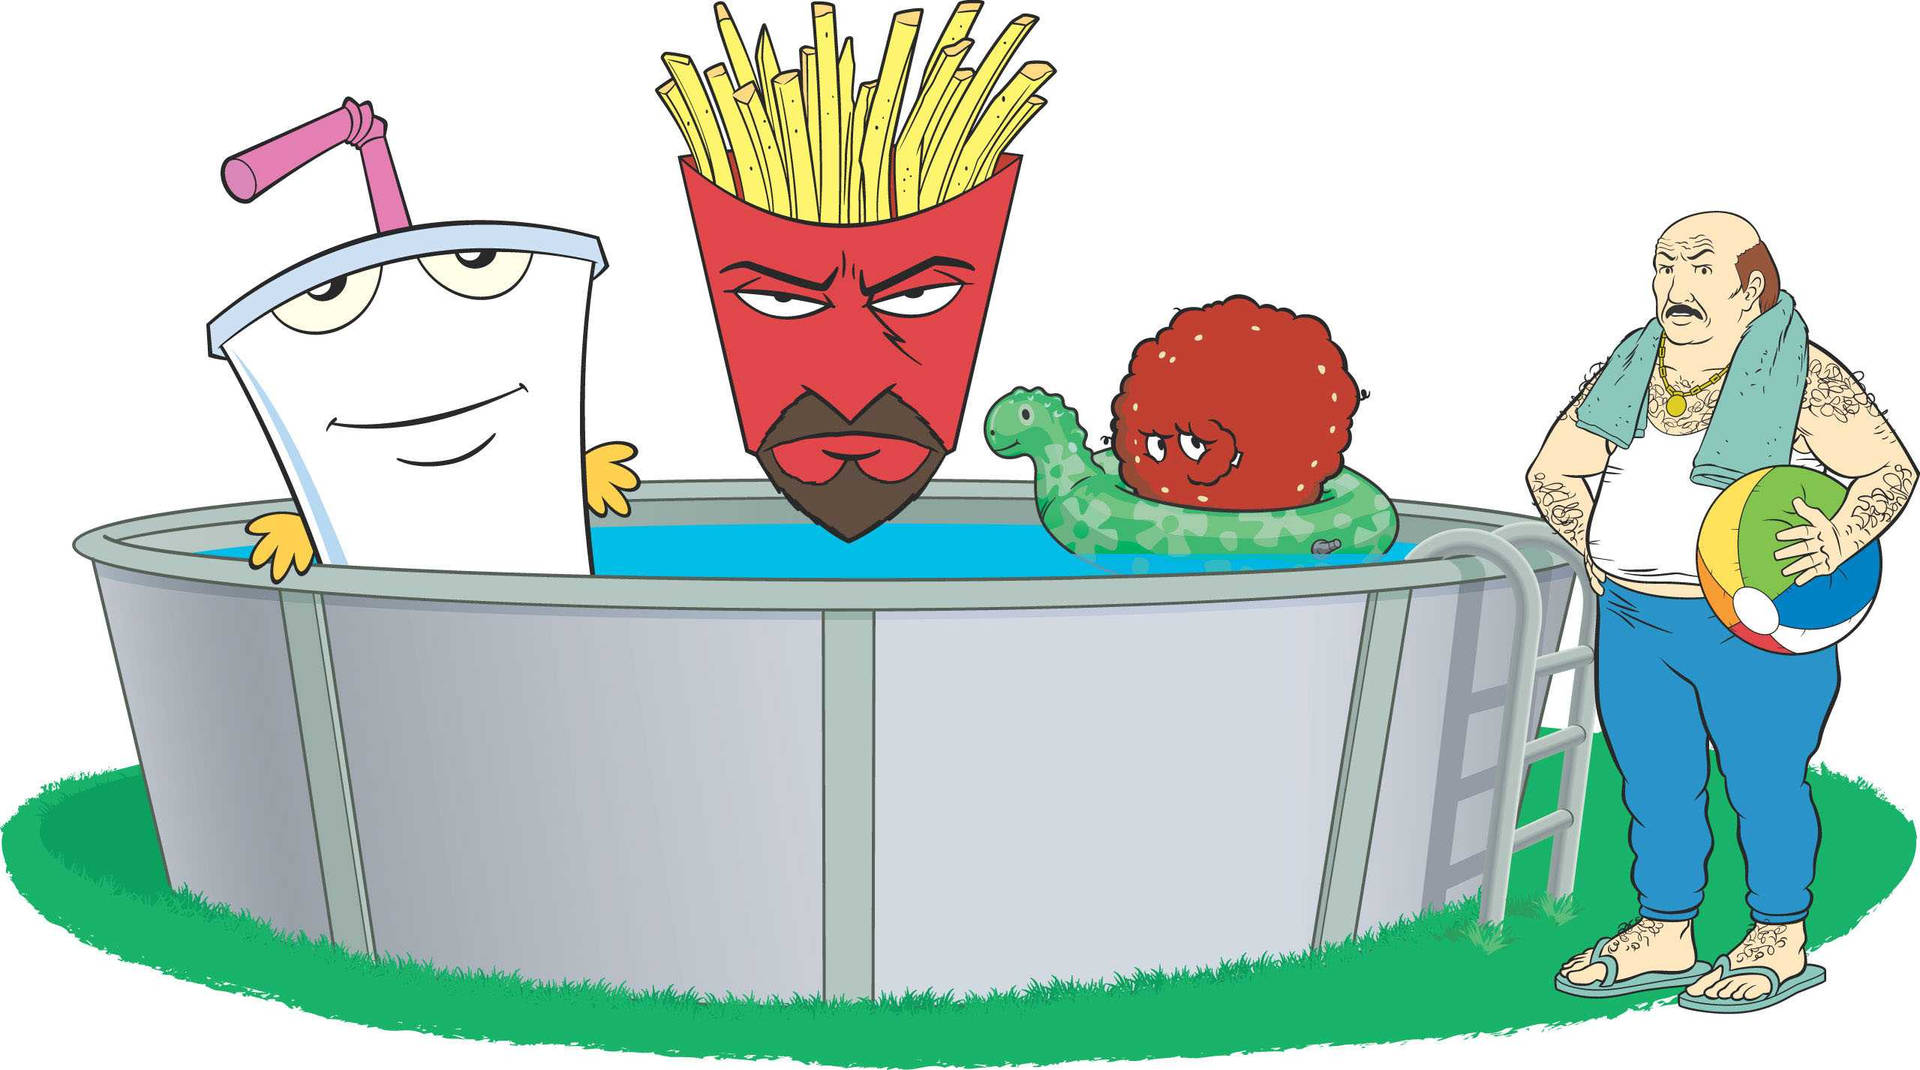 Caption: Aqua Teen Hunger Force Having Fun By The Pool Side With Carl